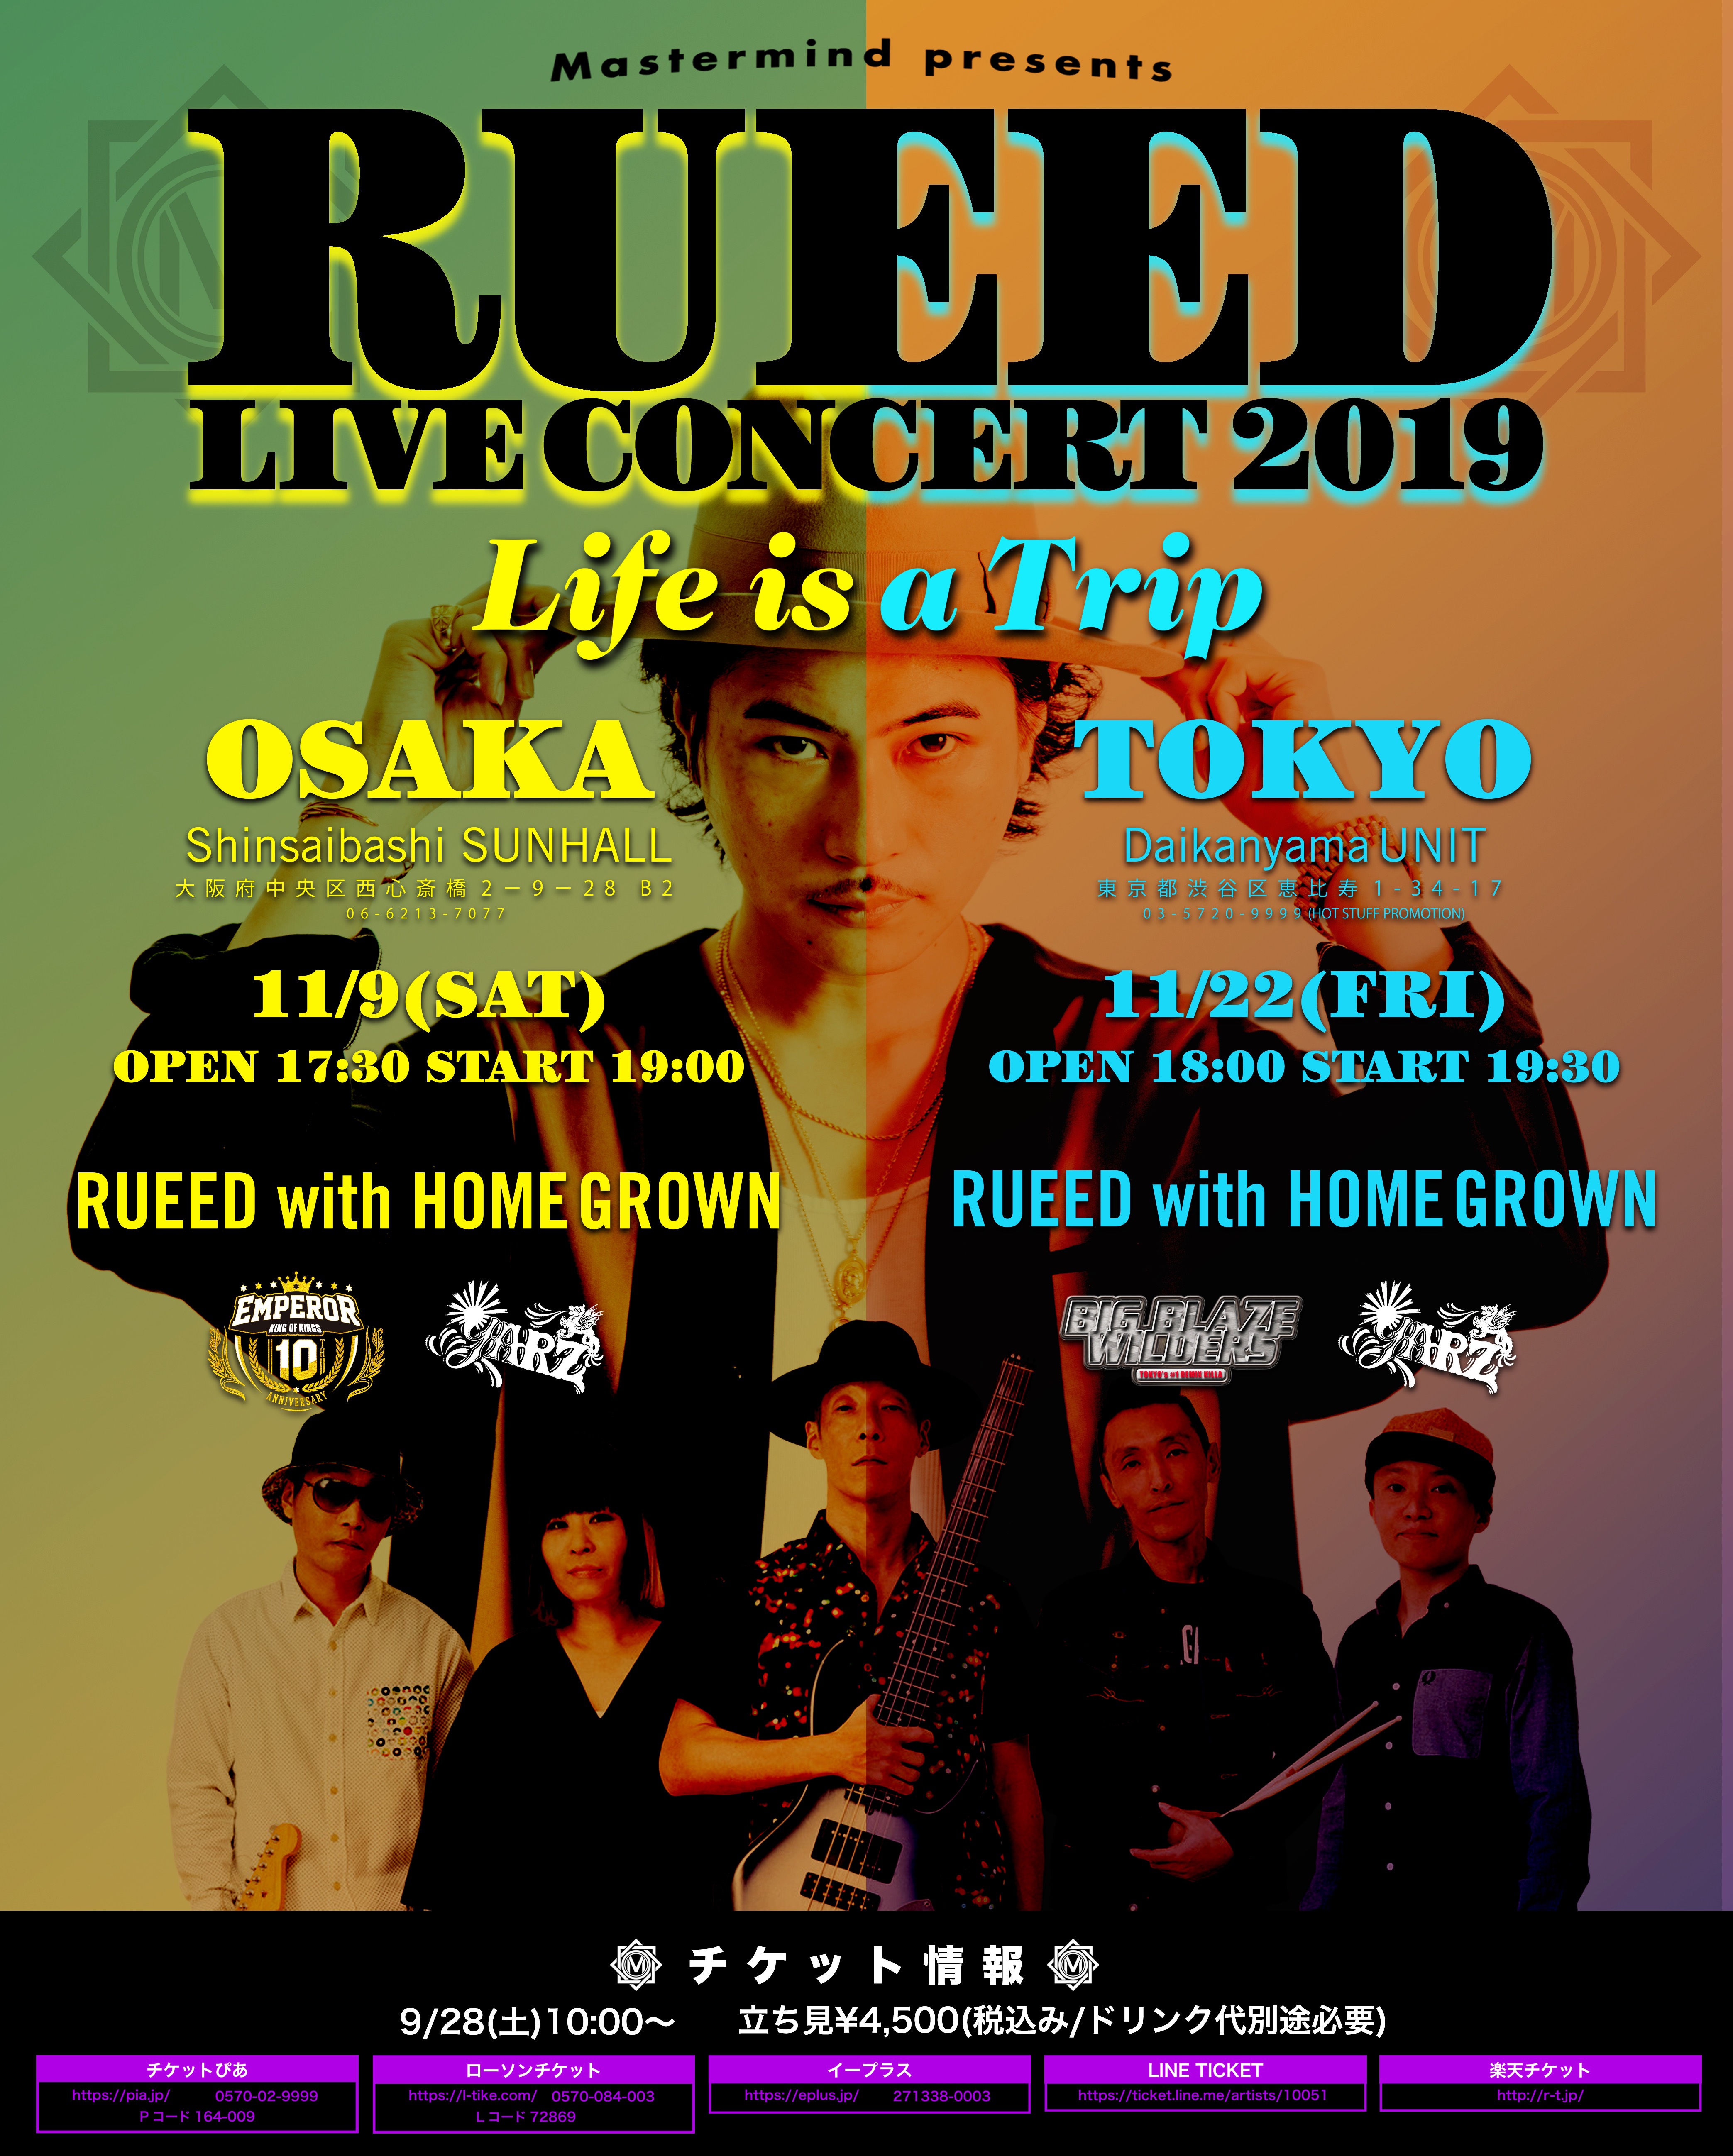 Rueed Live Concert 2019 ~Life is a Trip~